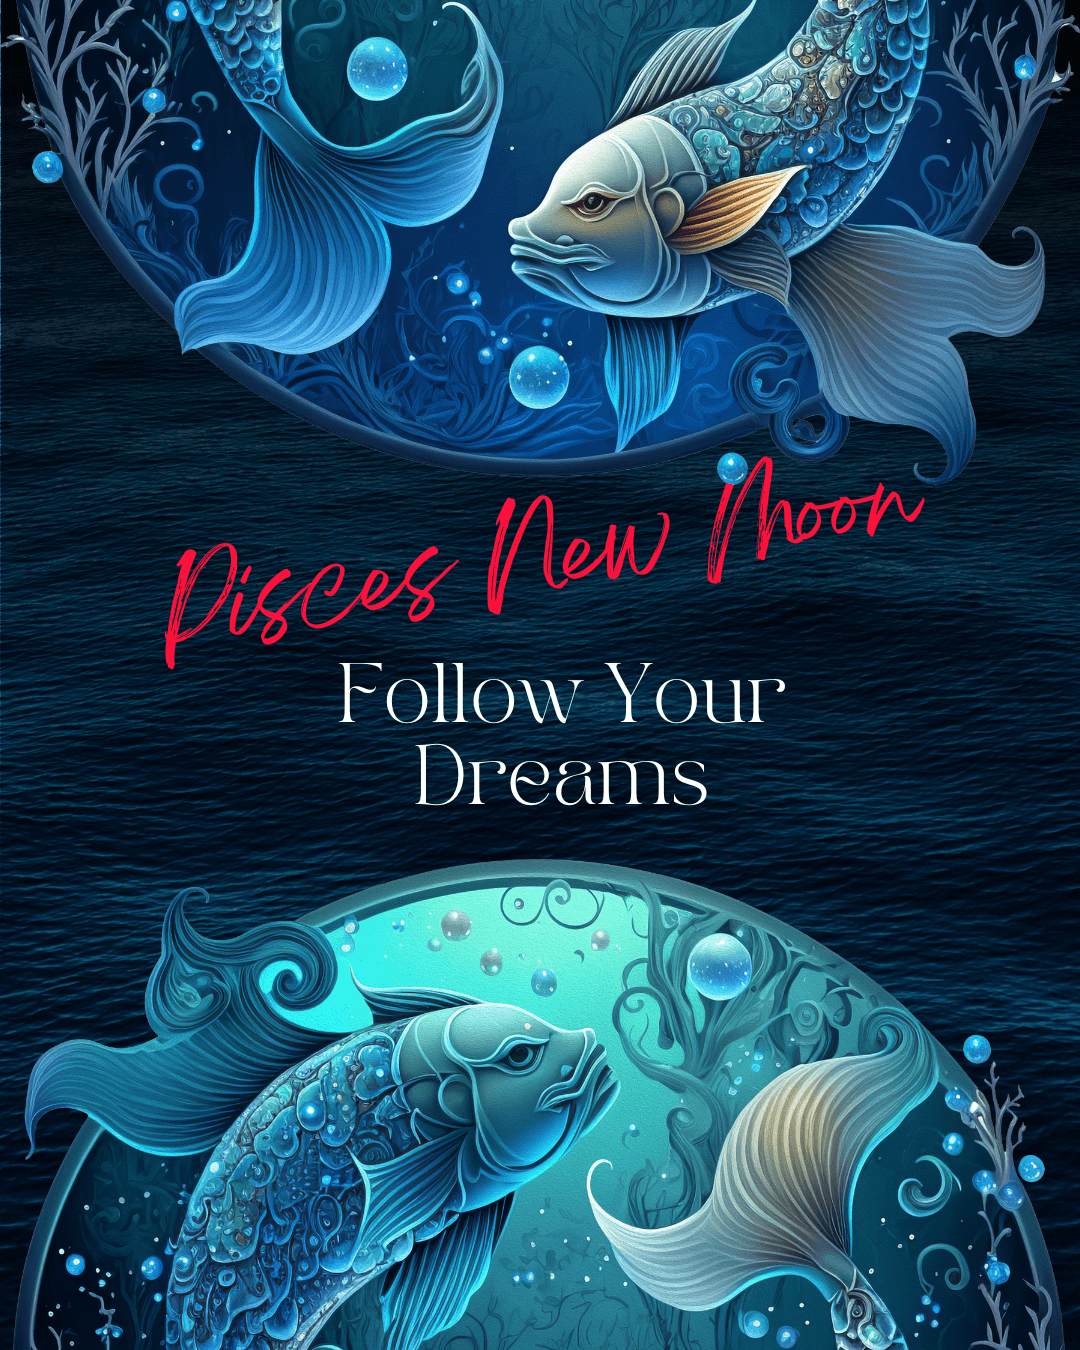 New Moon in Pisces - Feb - Follow Your Dreams